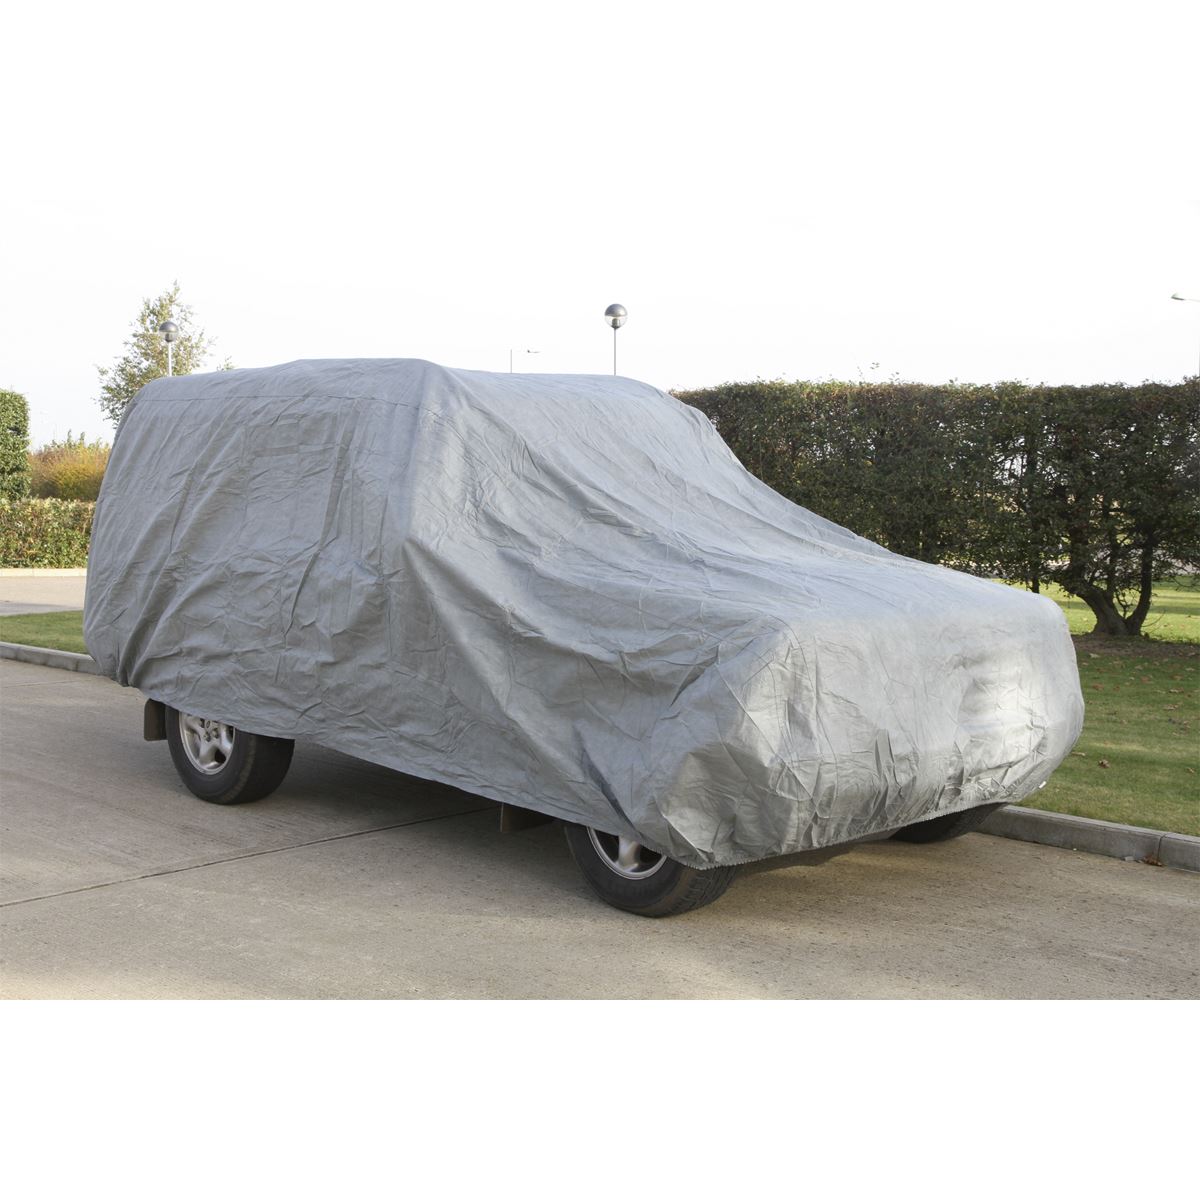 Sealey Premier All-Seasons Car Cover 3-Layer - Large